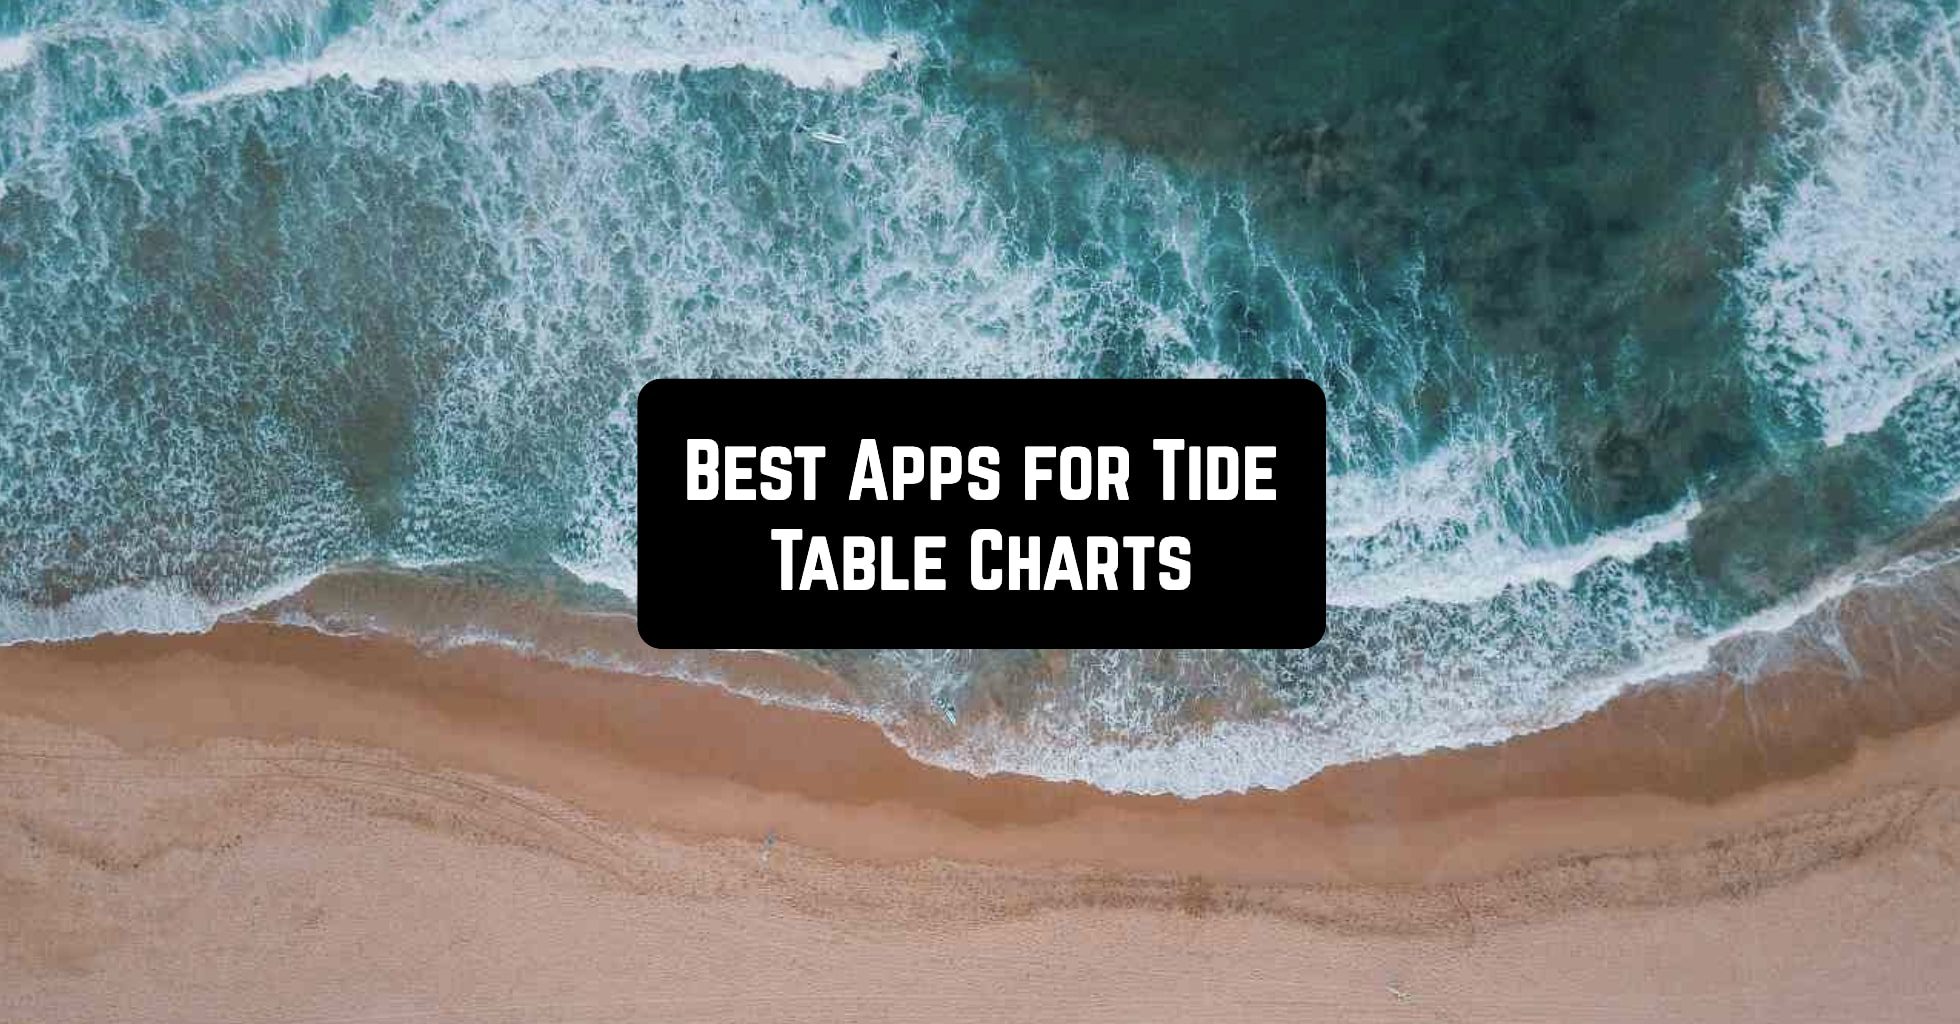 Best Apps for Tide Table Charts